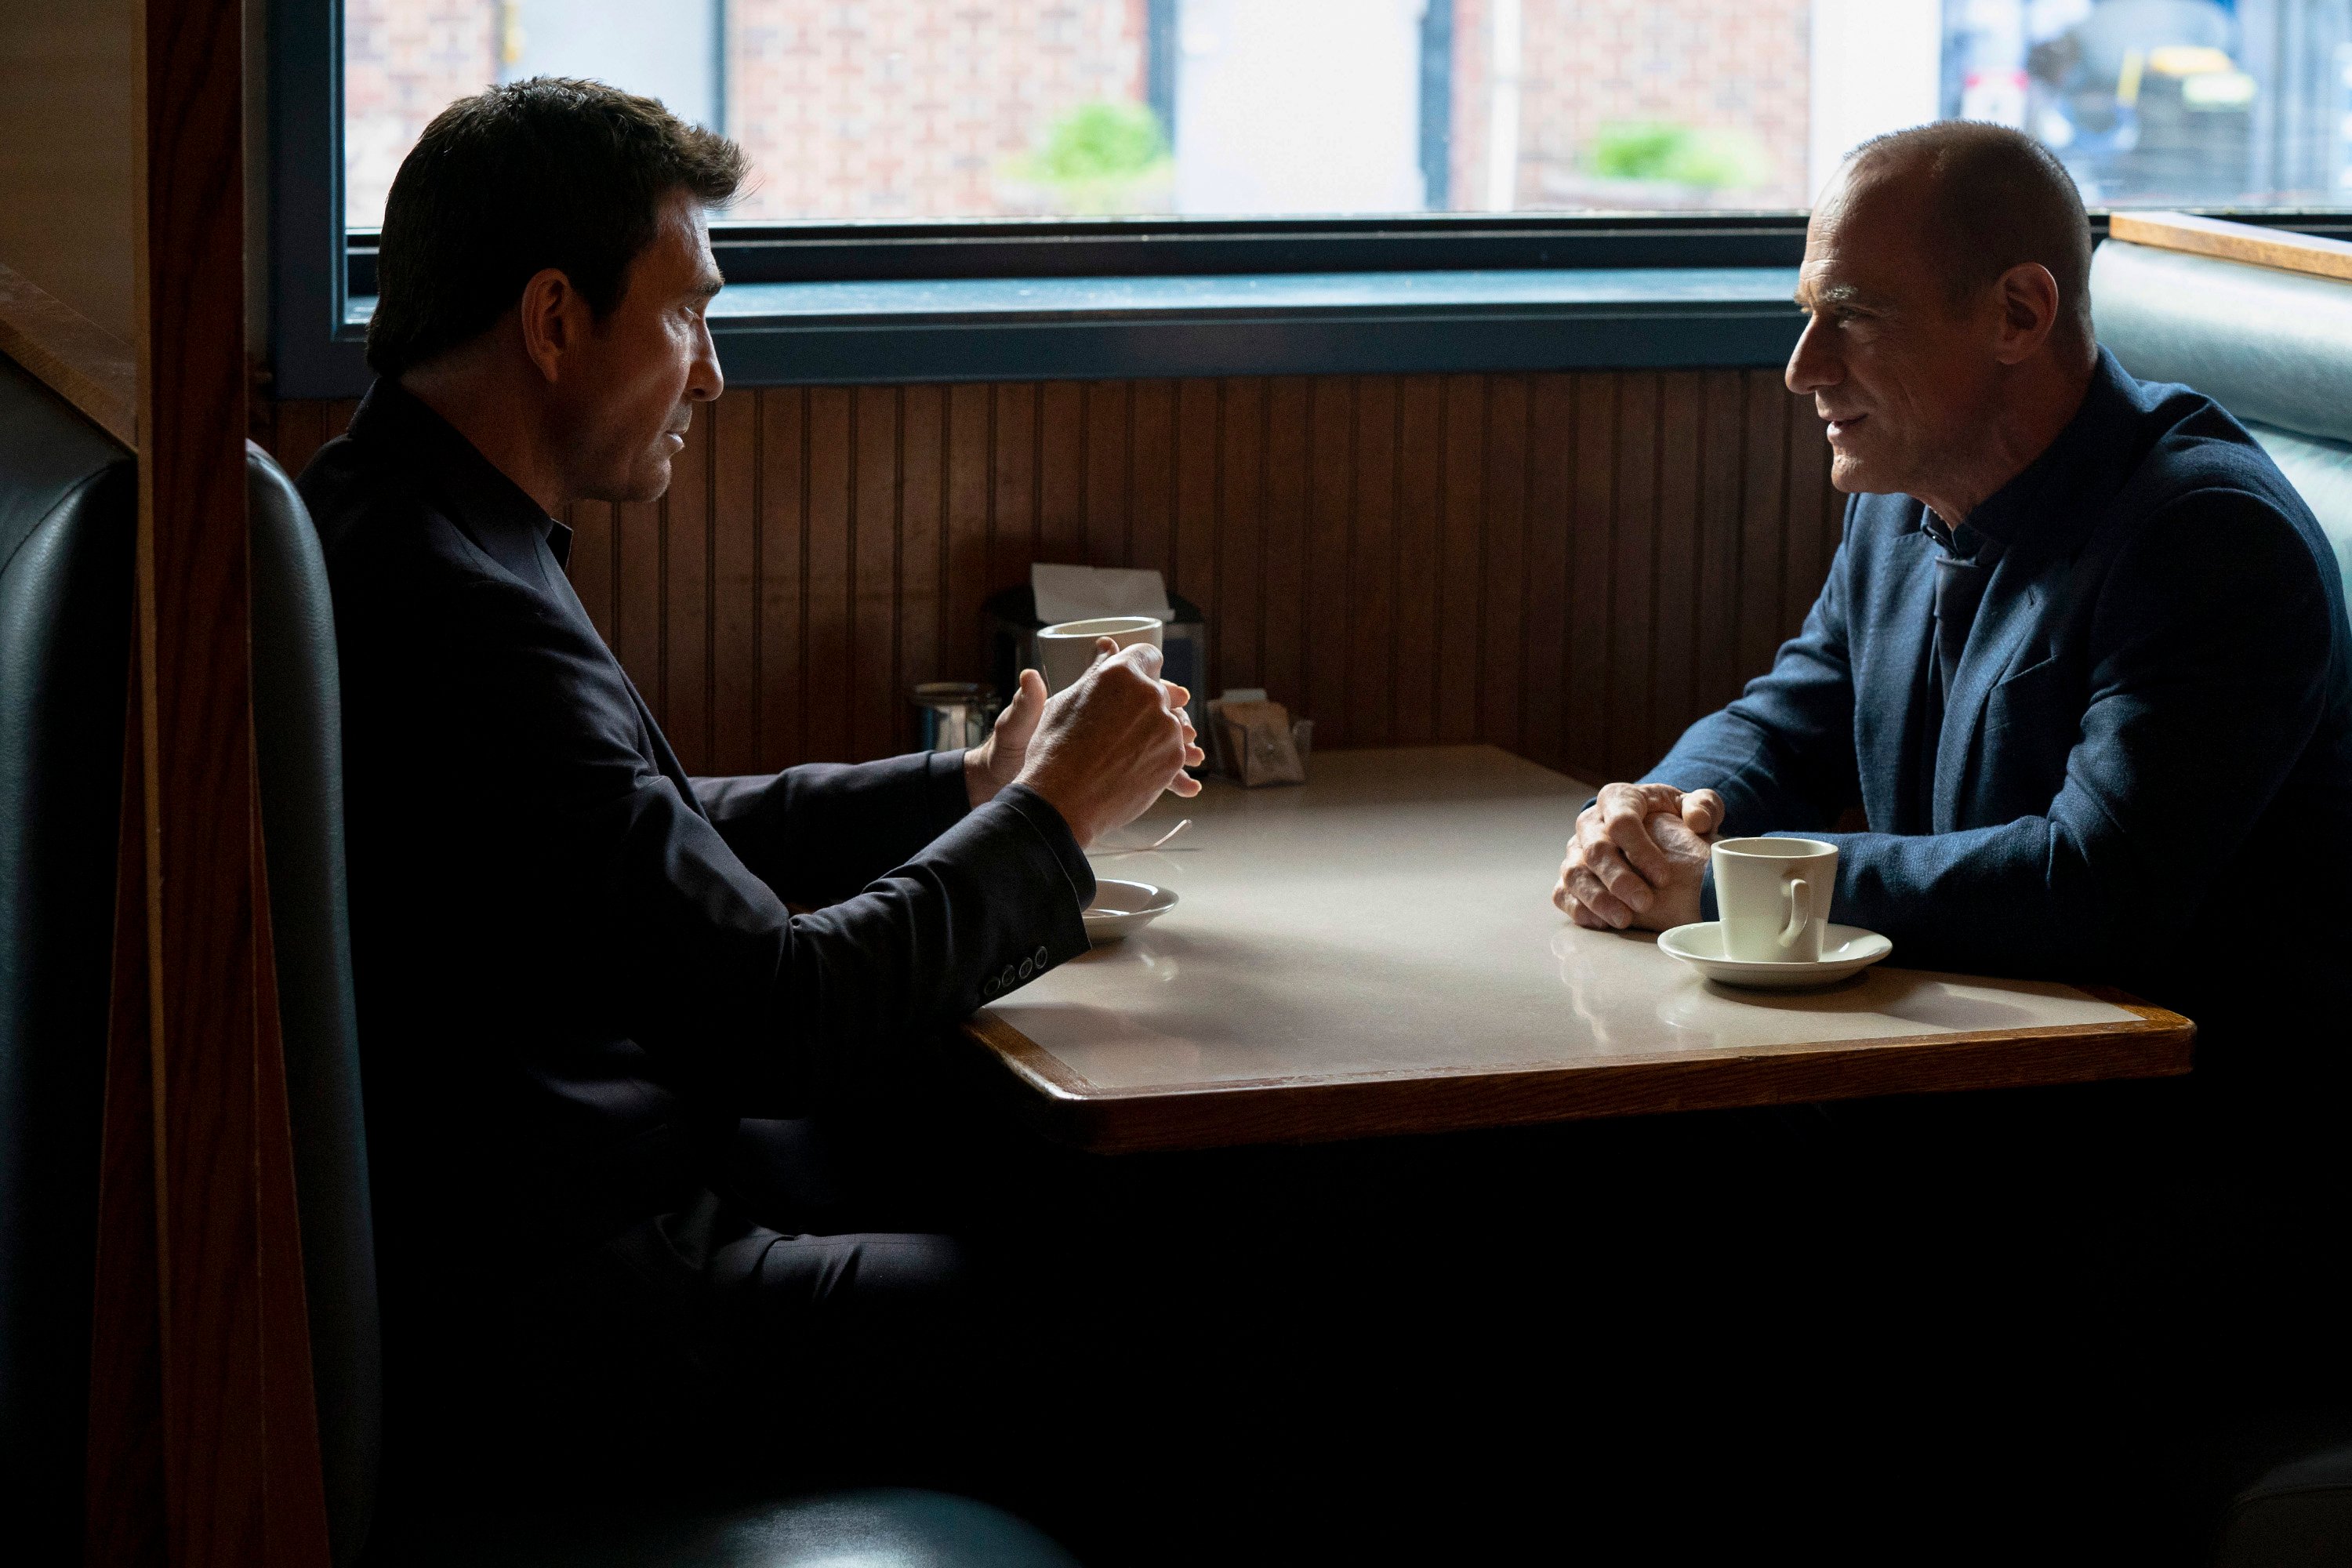 Dylan McDermott as Richard Wheatley and Christopher Meloni as Detective Elliot Stabler